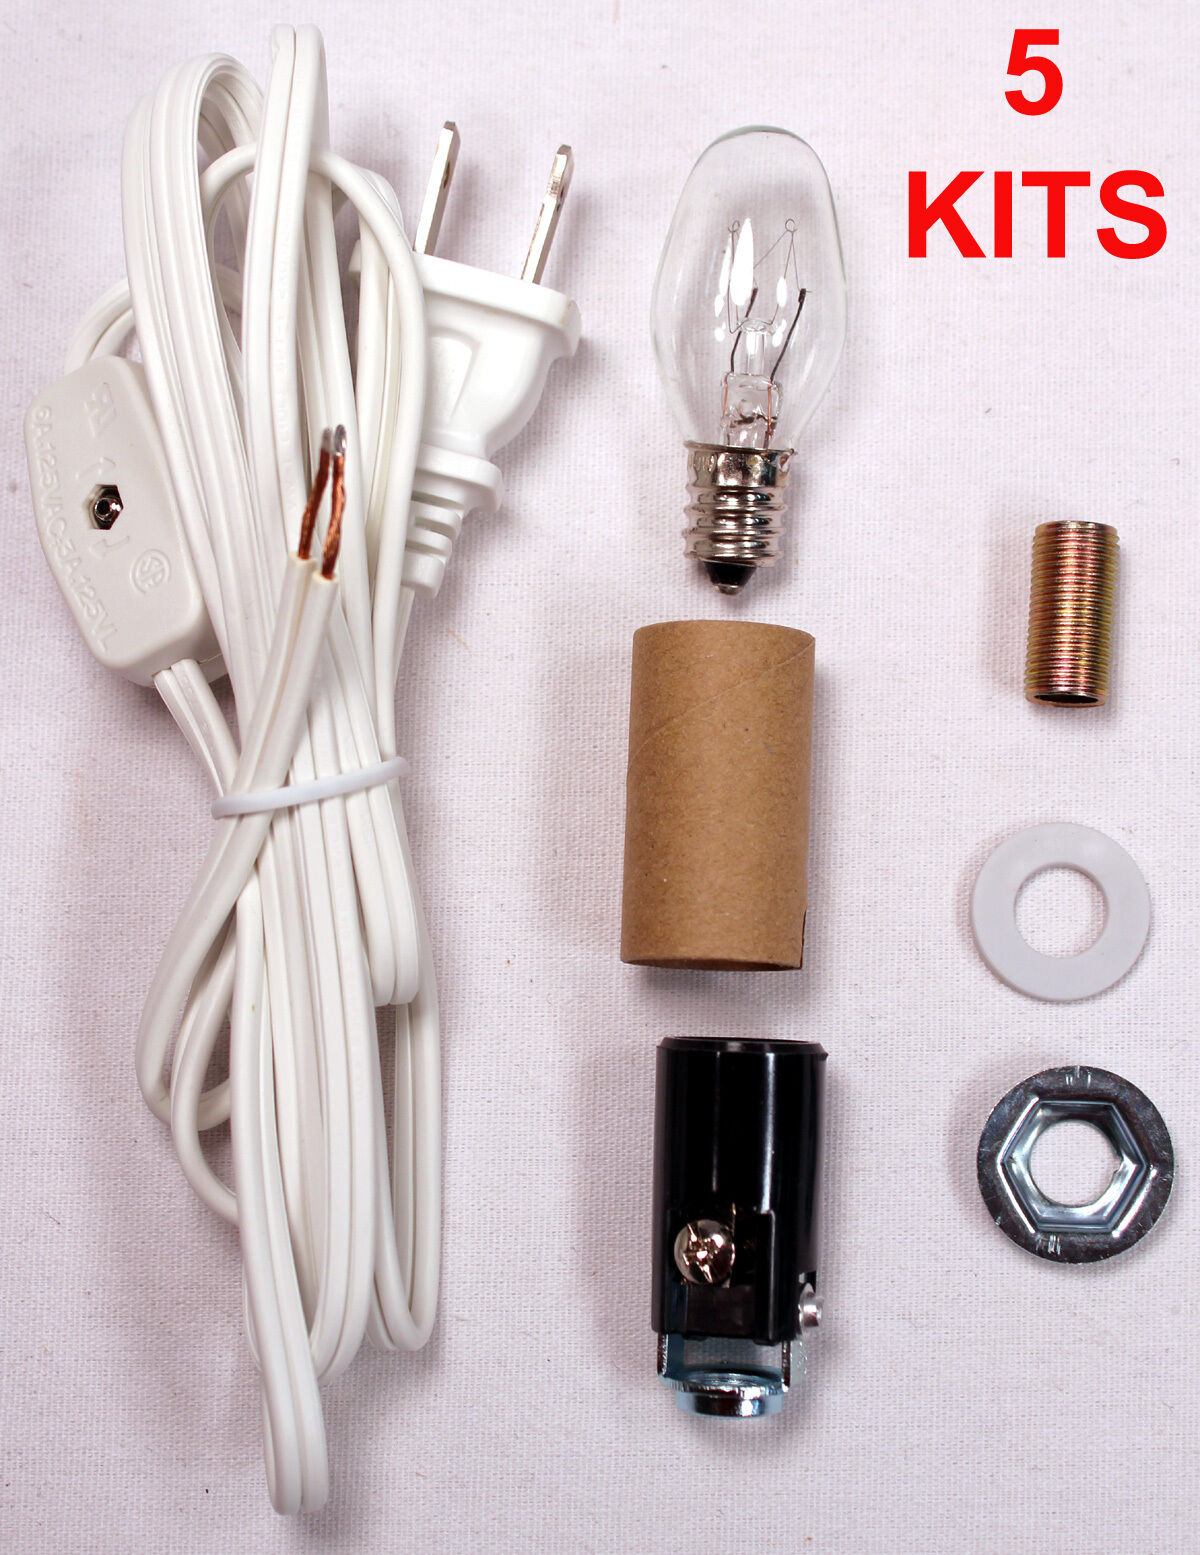 Lot of 5 - Small Christmas Tree Wiring Kits #ML2-B6, For Lighting Small Objects